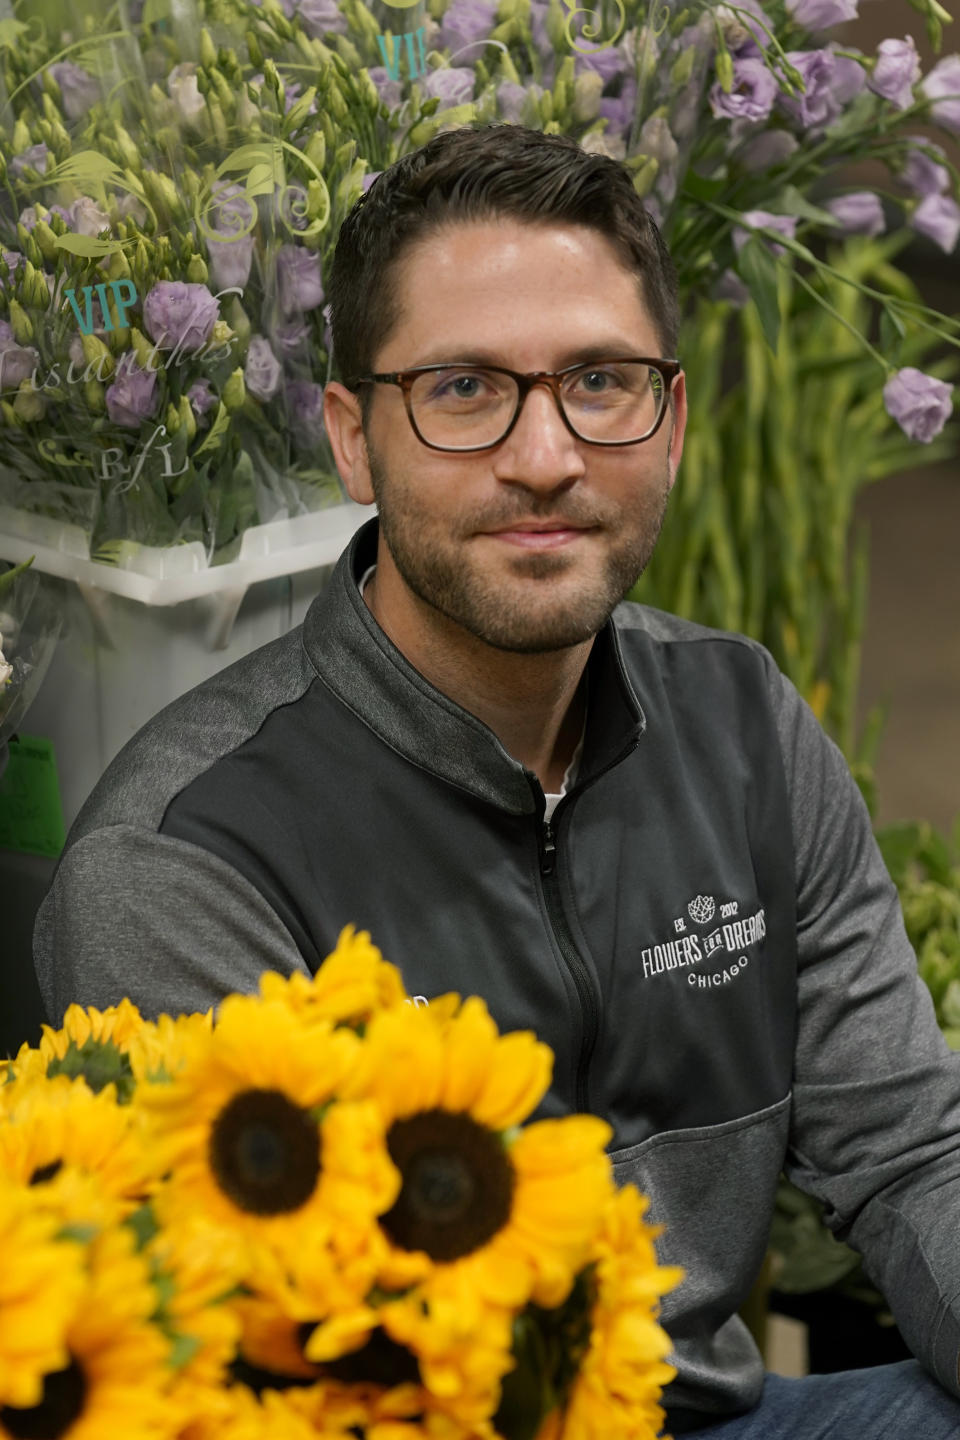 Steven Dyme, owner of Flowers for Dreams, poses for a portrait at his warehouse Friday, July 23, 2021, in Chicago. Dyme says the $15 minimum made it much easier to staff up when the economy reopened this spring and demand for flowers, particularly for weddings, soared. The company has four locations, including its headquarters in Chicago, one in Milwaukee, and two in Detroit. (AP Photo/Charles Rex Arbogast)